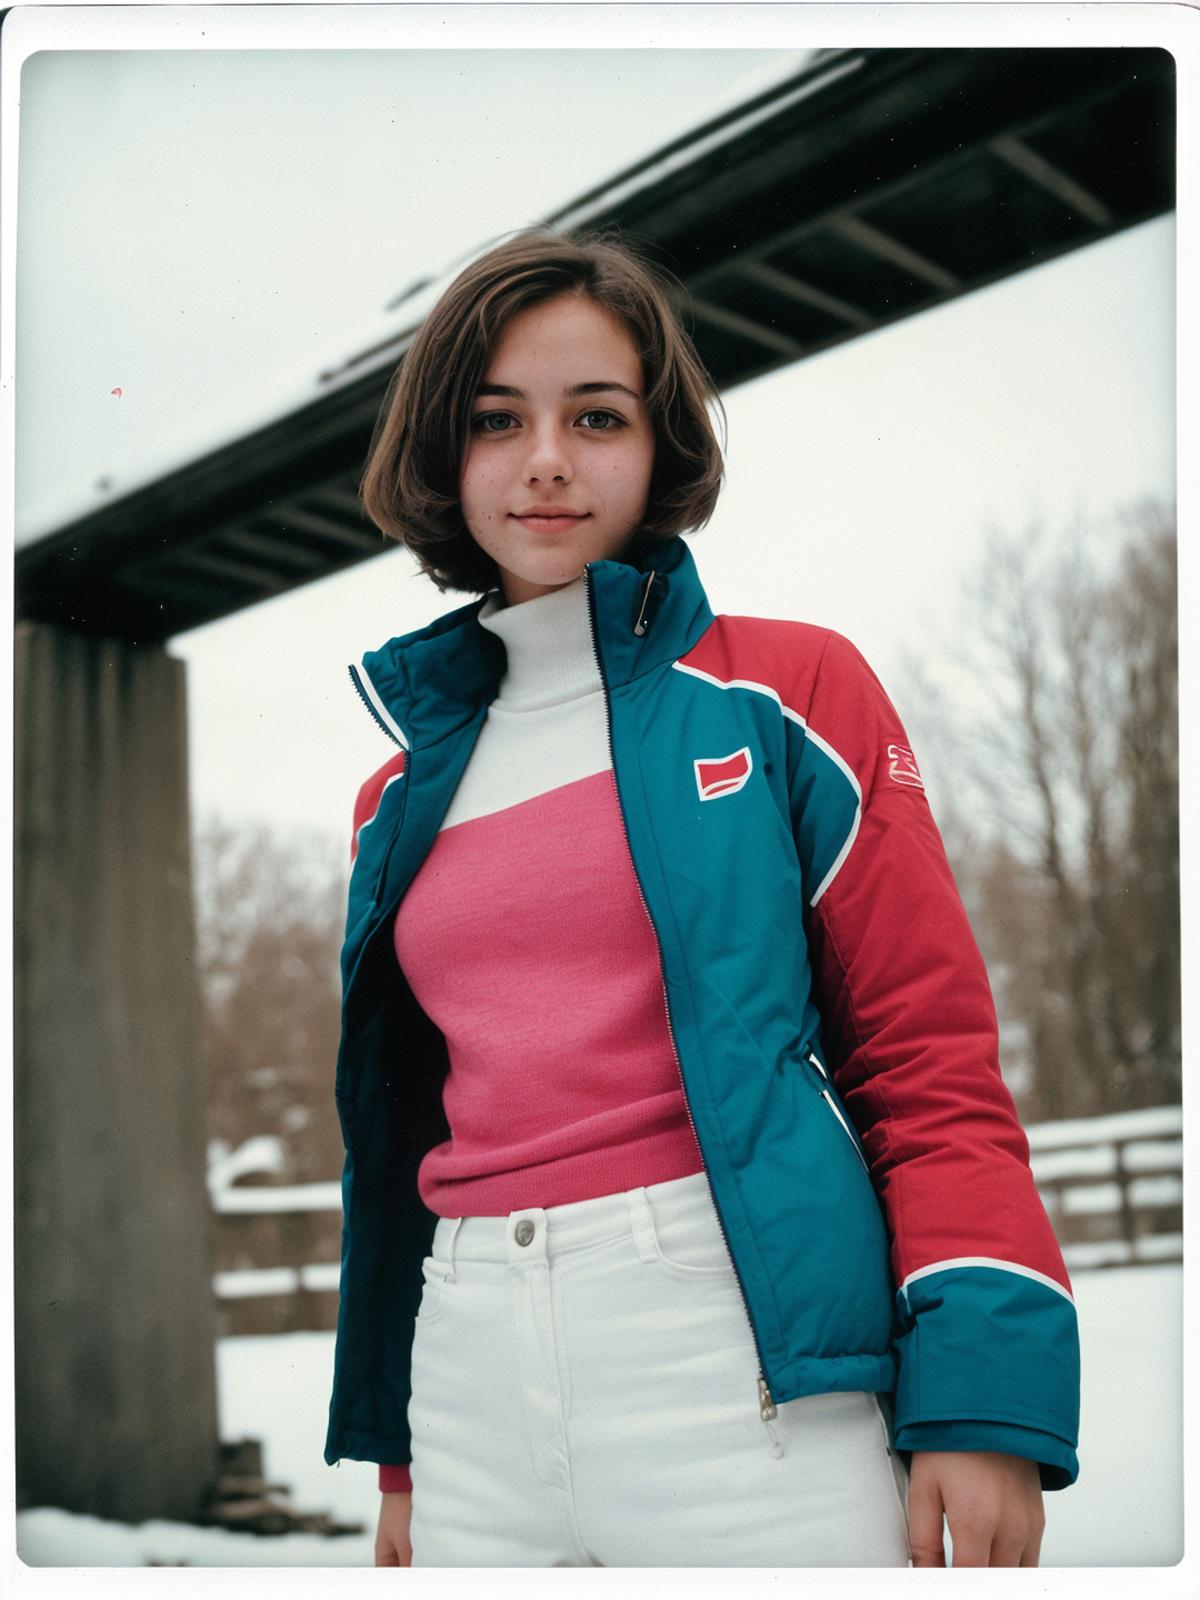 A young woman wearing a blue and red jacket and white pants.